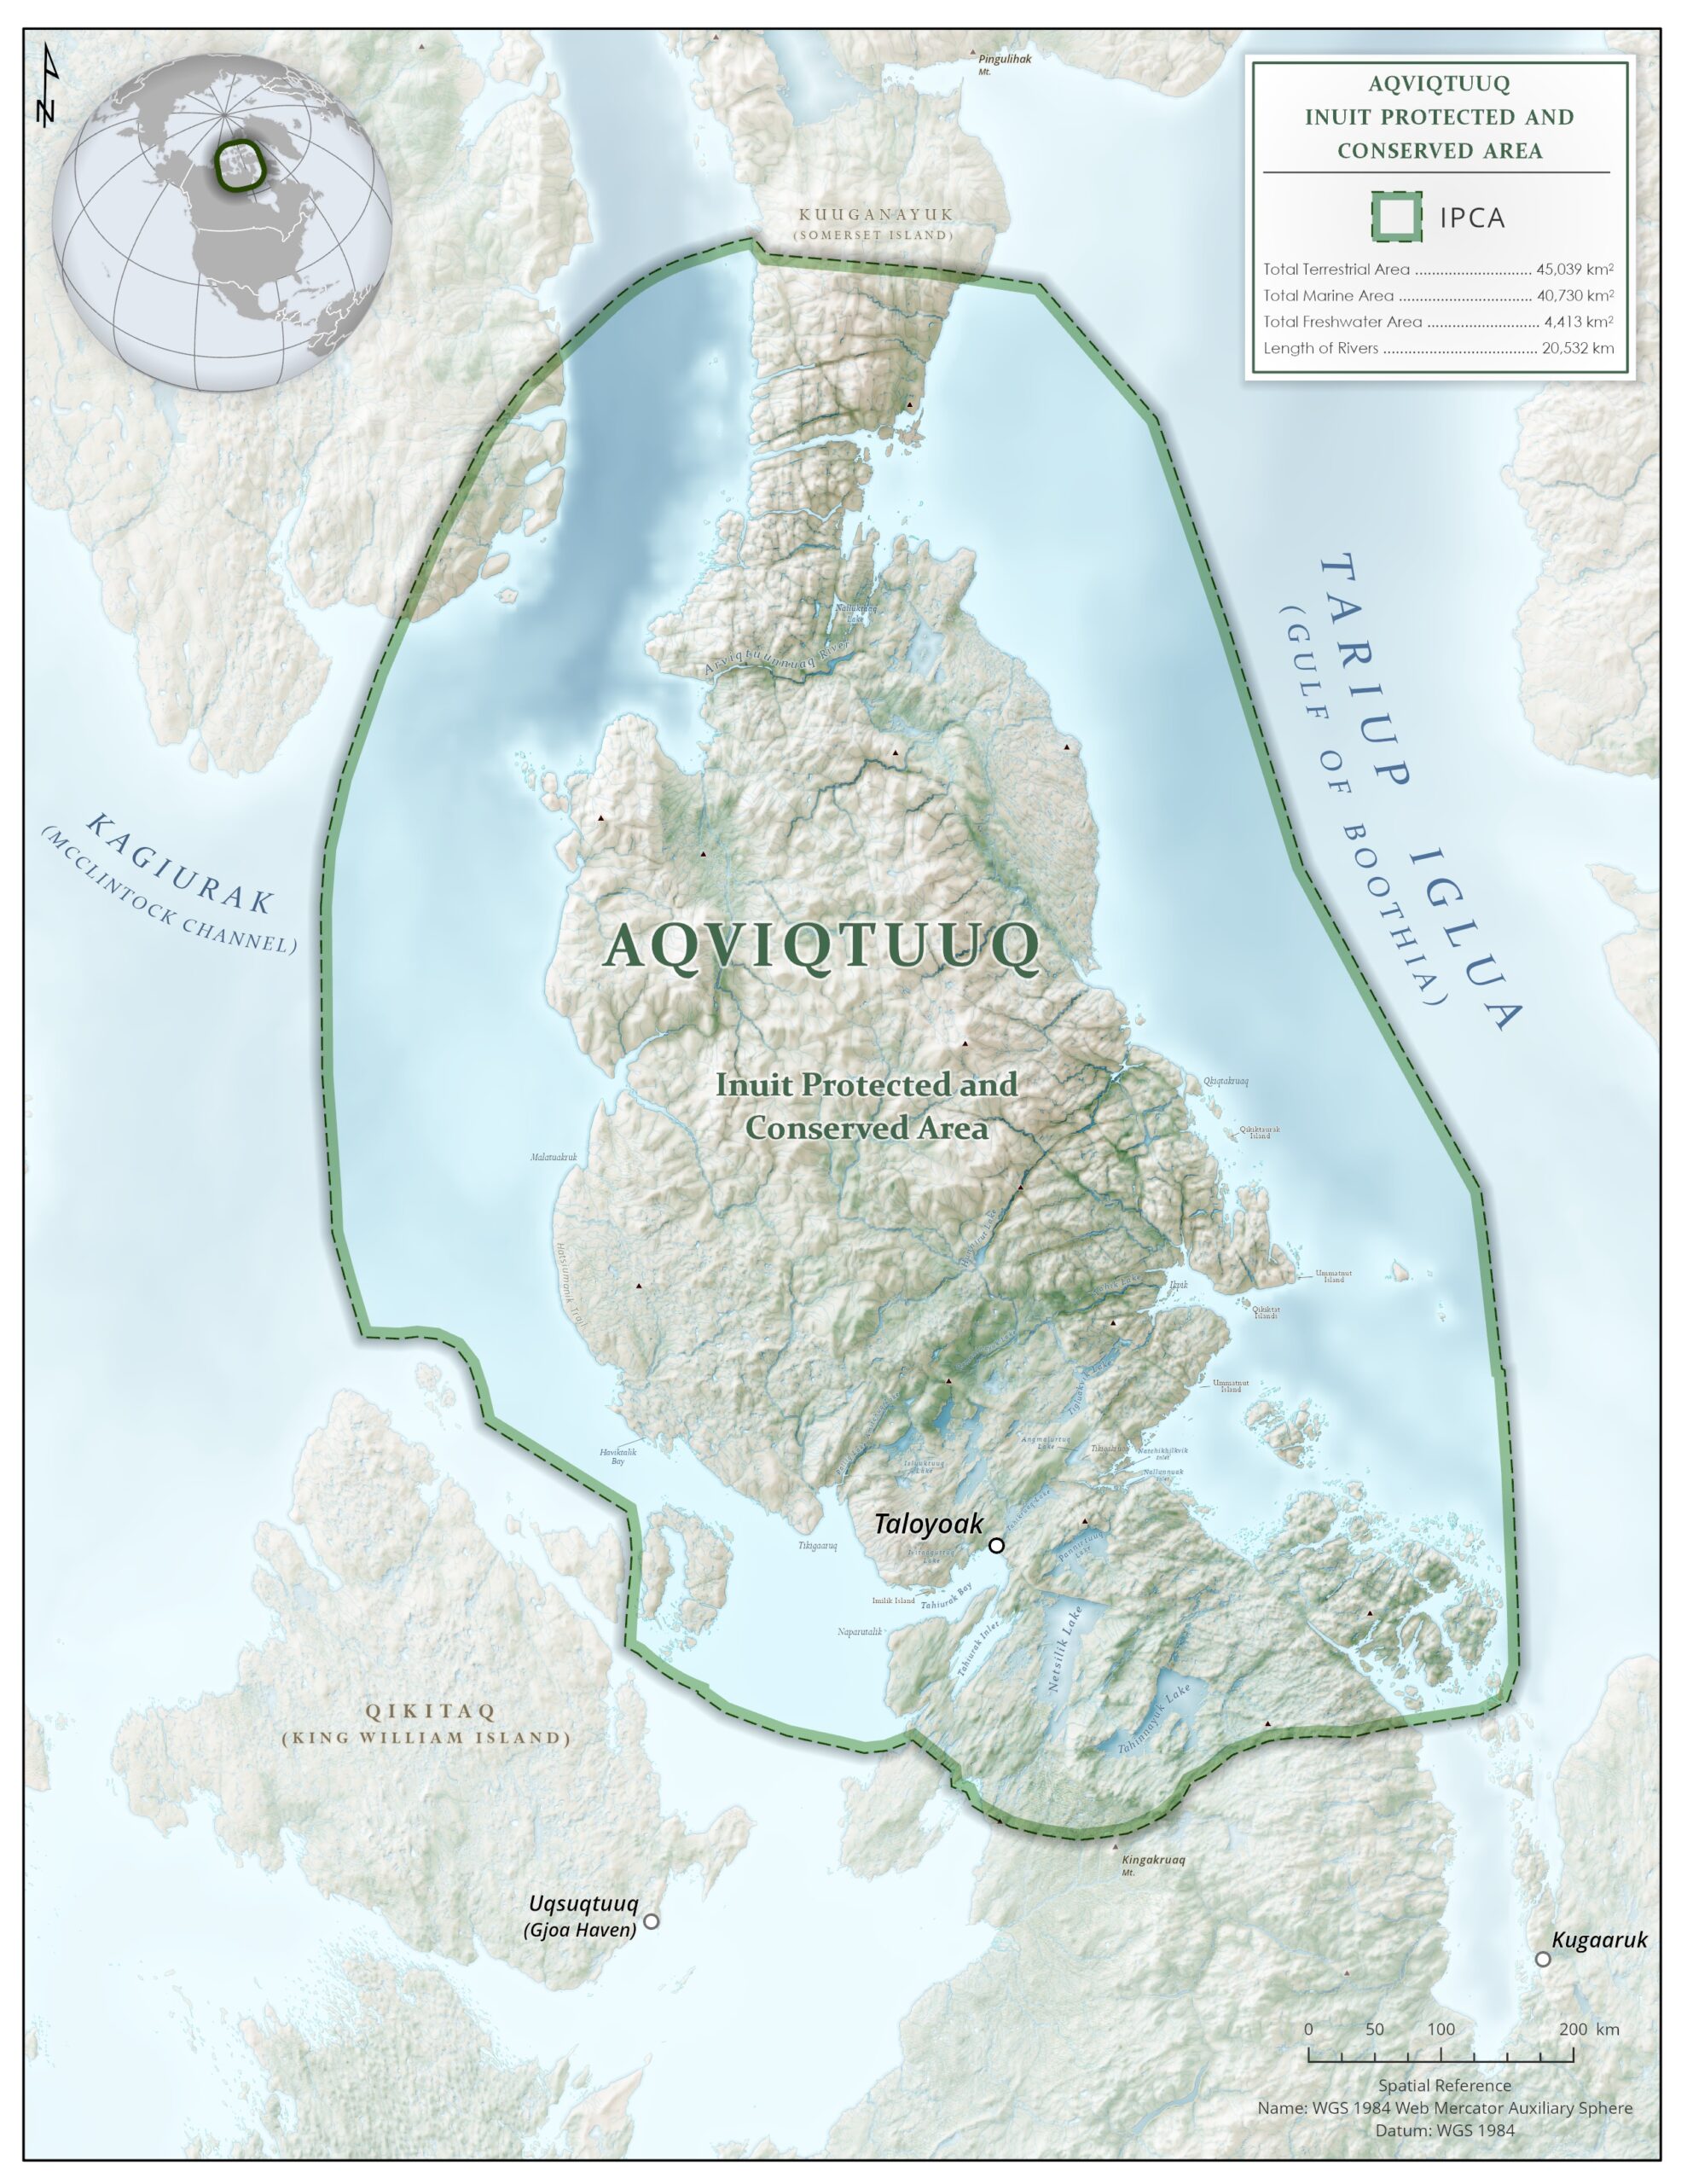 Map of a proposed Inuit protected area called Aqviqtuuq in the Boothia Peninsula